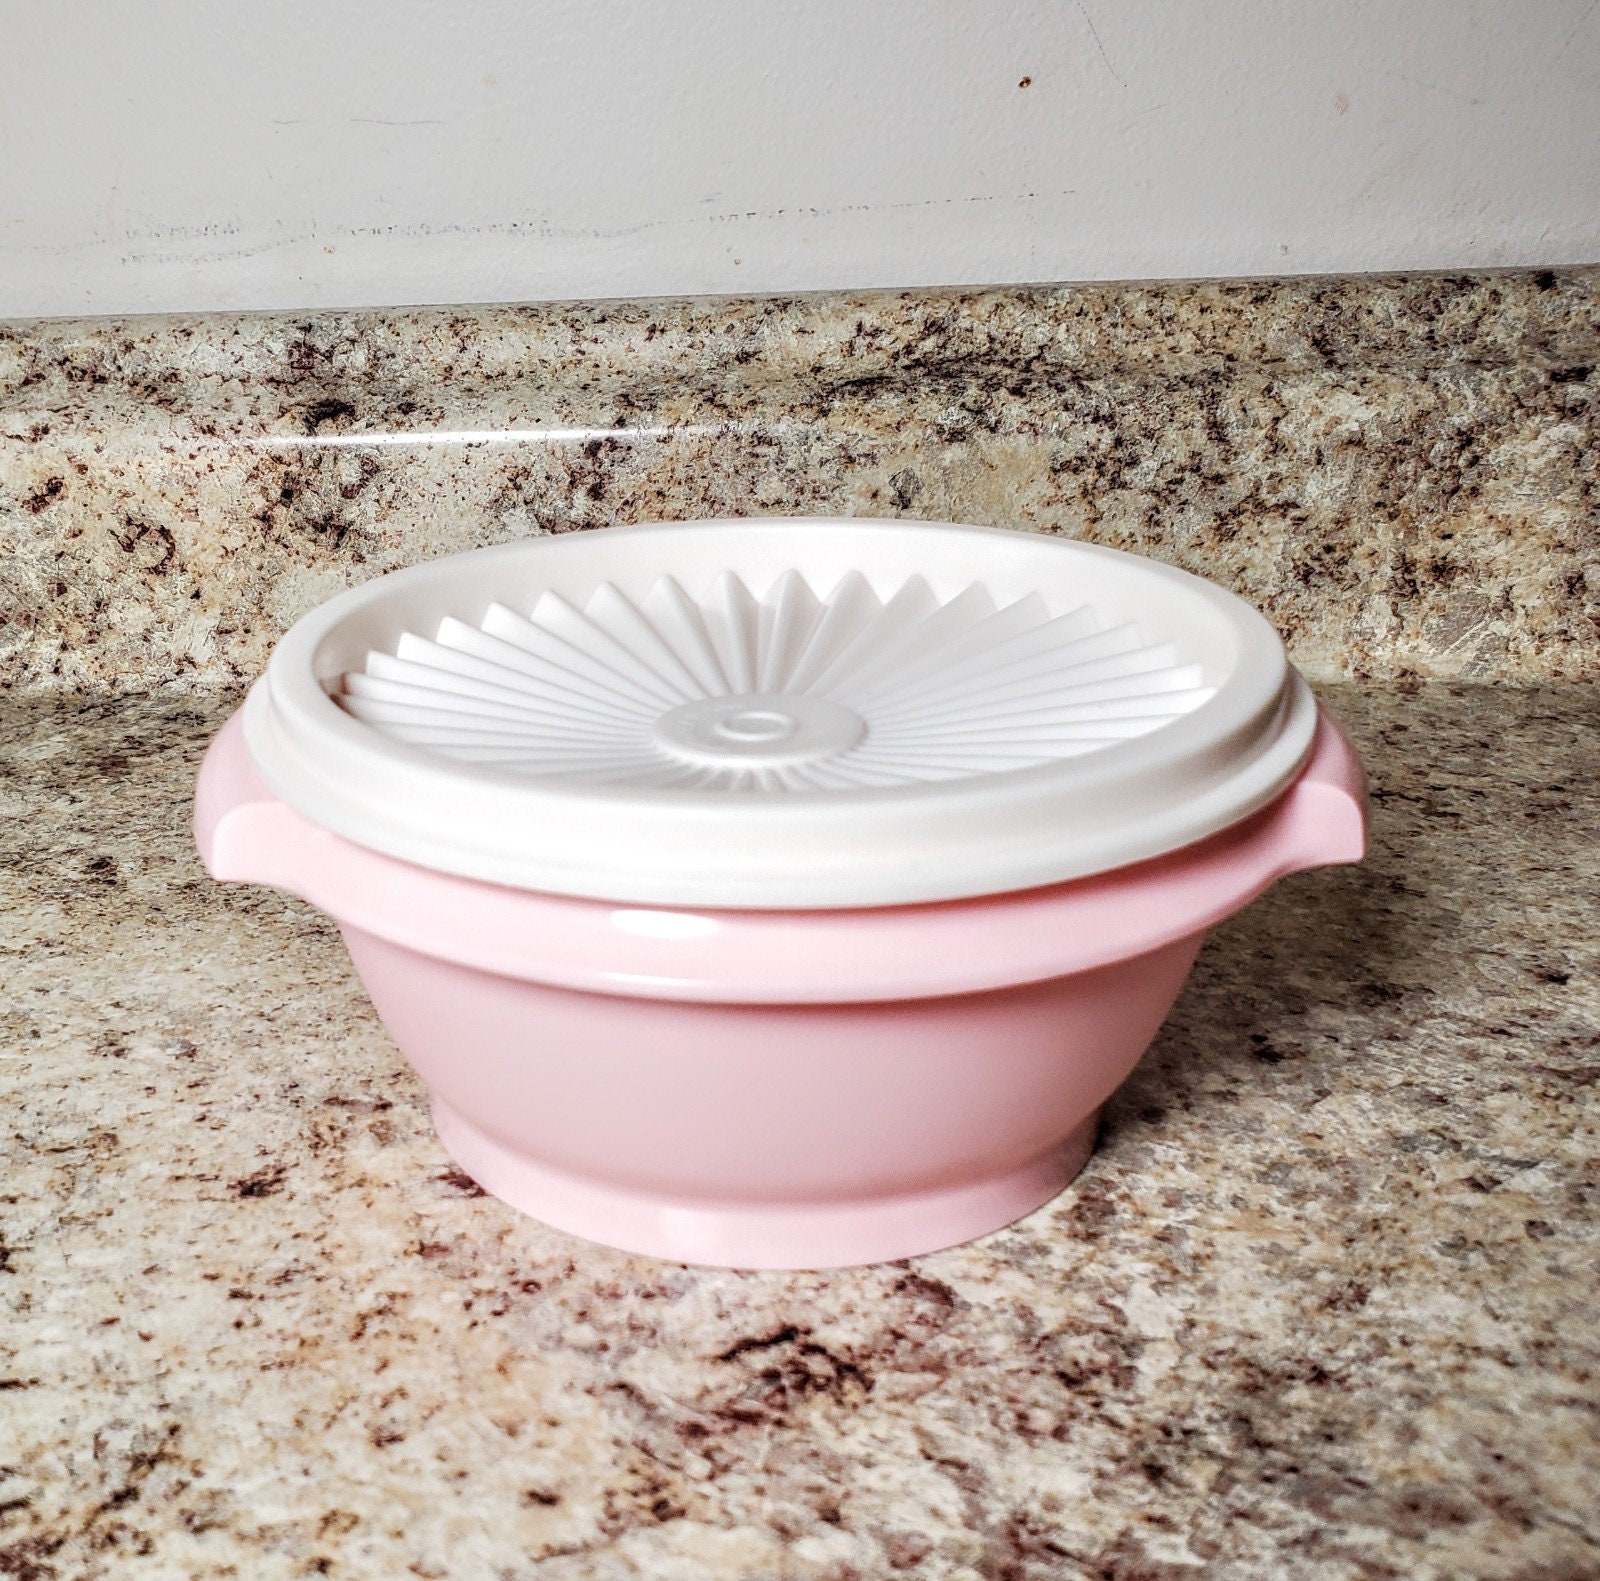 NEW Tupperware Limited Edition Vintage Collection Servalier Bowl Set 